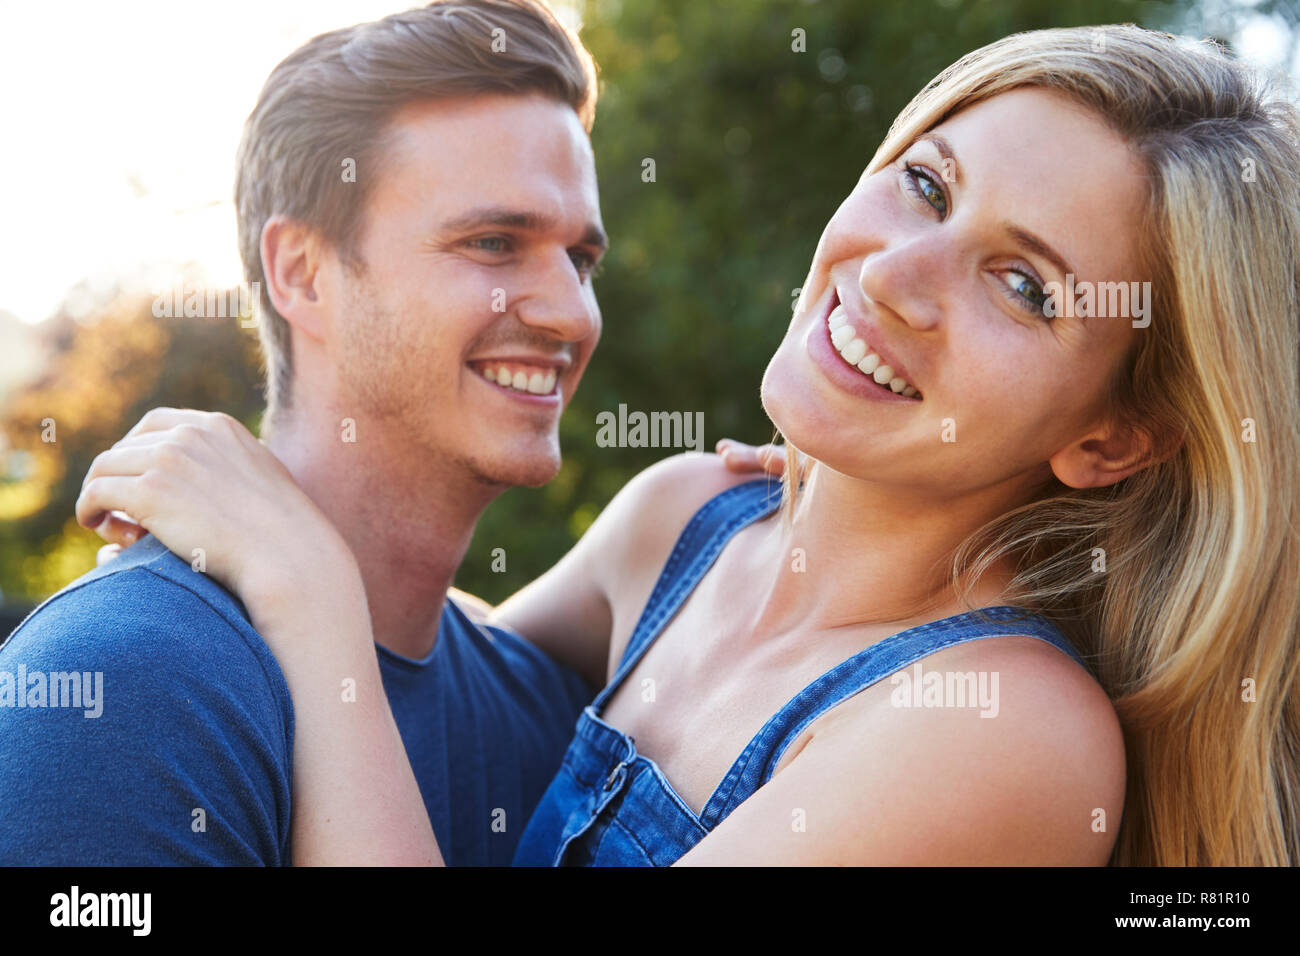 Portrait Of Smiling Couple Outdoors In Summer Park Stock Photo